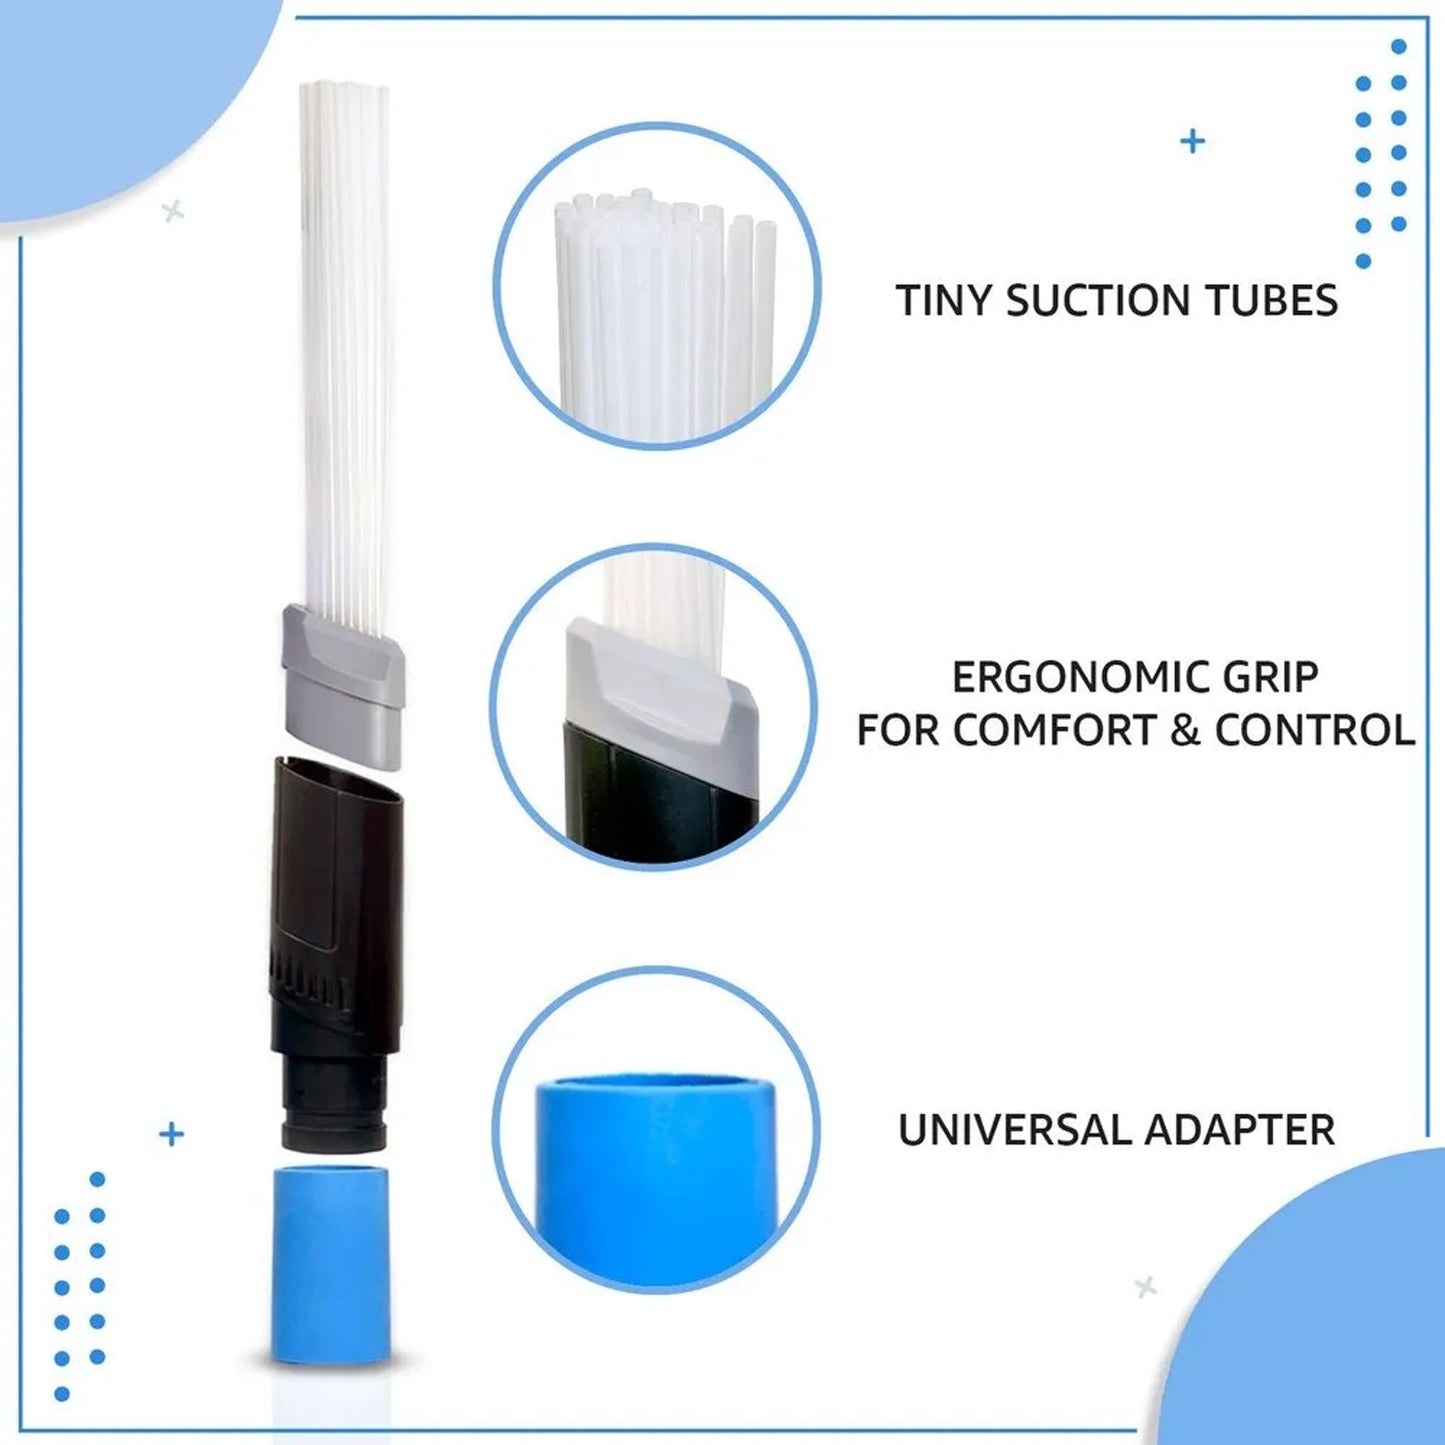 4043 Universal Vacuum Cleaner Attachment Brush Suction Dirt Remover Sucker Flexible Small Mini Micro Tiny Tubes Straw Accessory Tool Car Home Kitchen. DeoDap